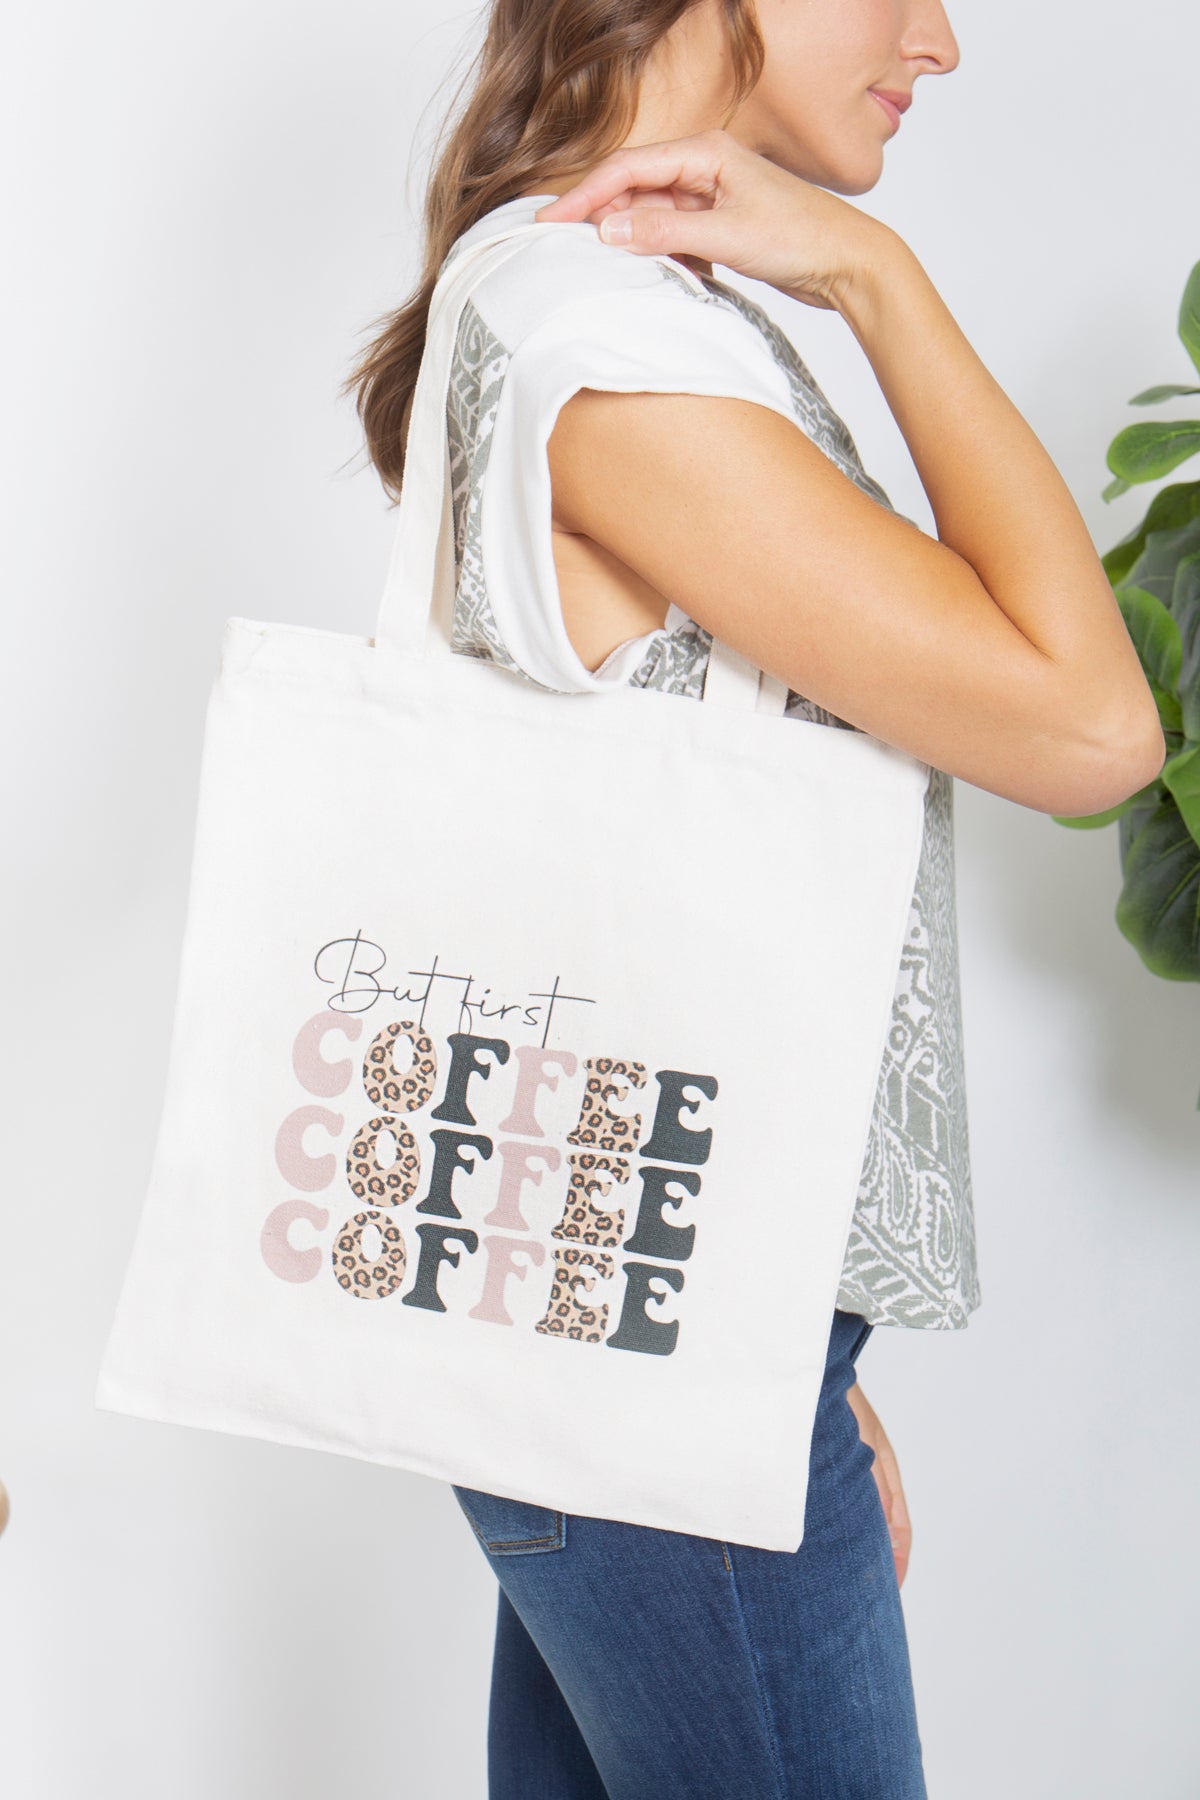 BUT FIRST COFFEE PRINT TOTE BAG/6PCS (NOW $1.50 ONLY!)